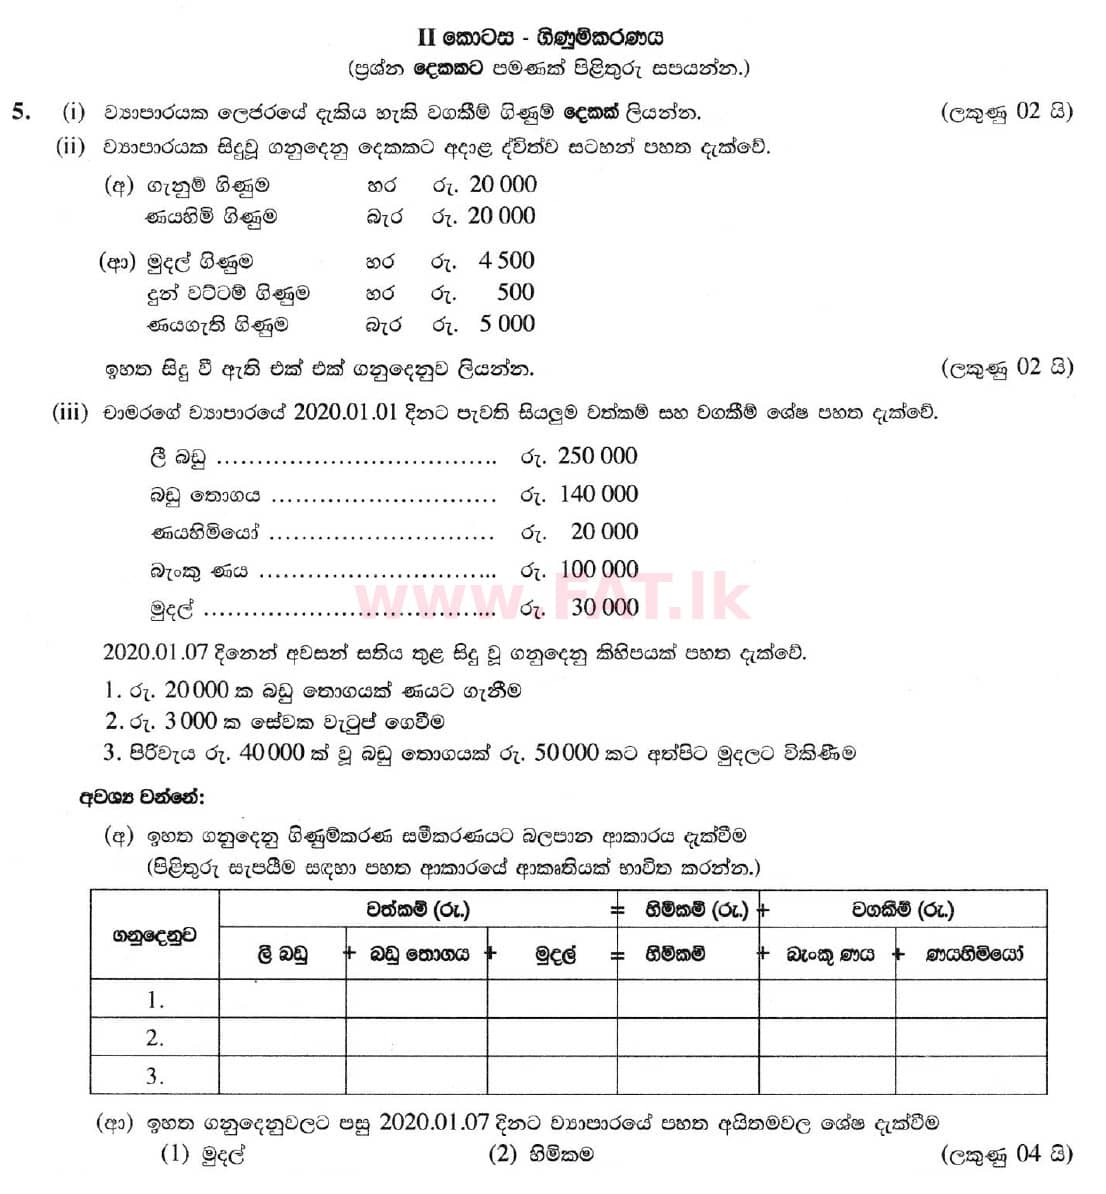 National Syllabus : Ordinary Level (O/L) Business and Accounting Studies - 2020 March - Paper II (සිංහල Medium) 5 1